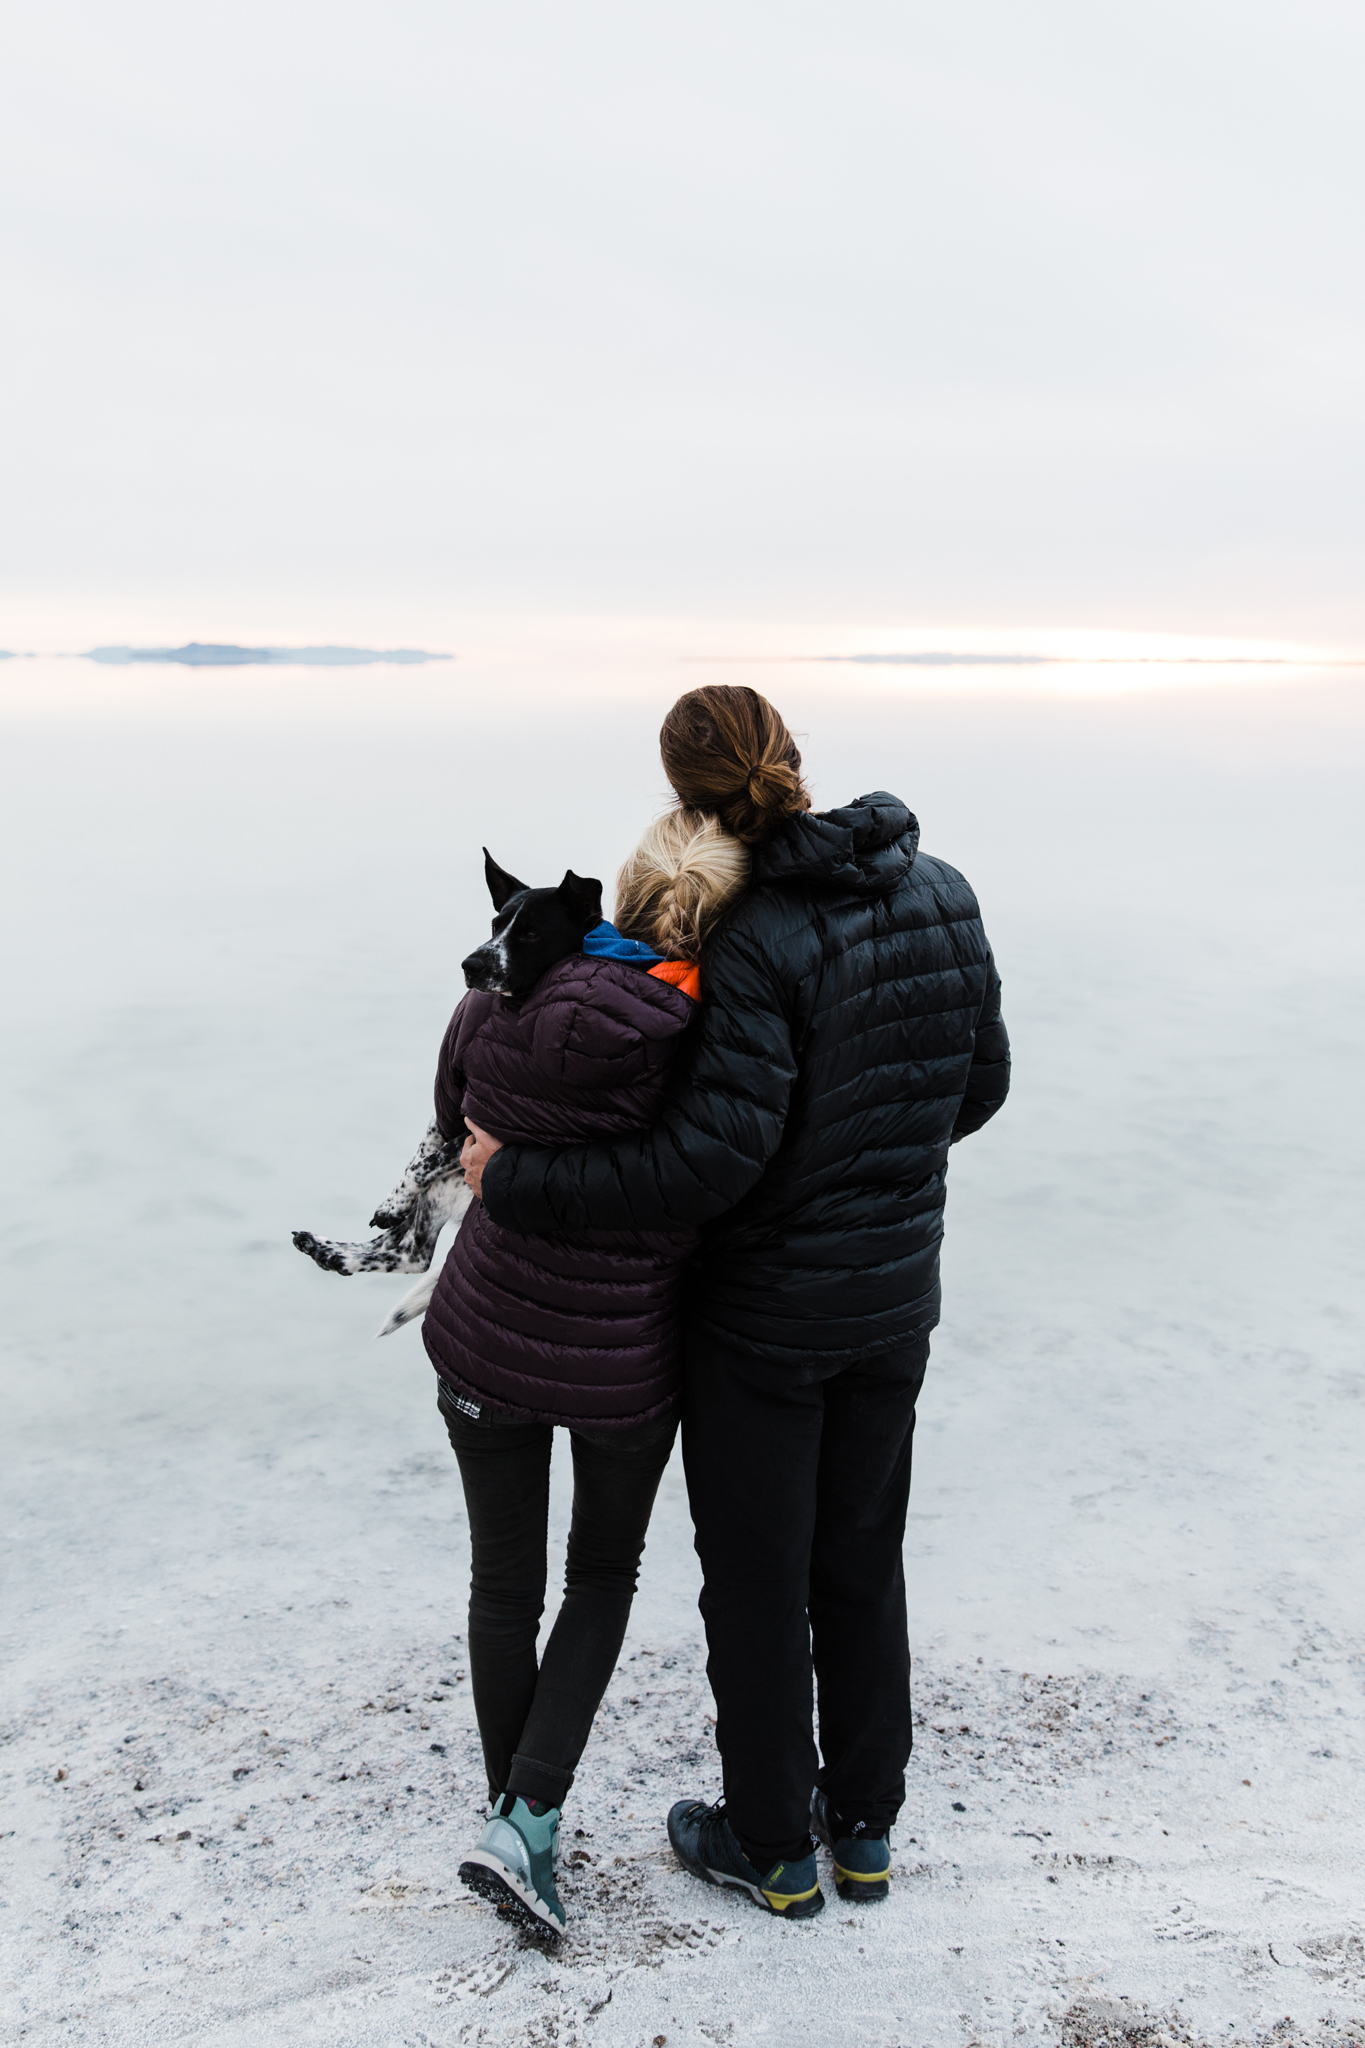 camping in the salt flats | utah and california adventure elopement photographers | the hearnes adventure photography | www.thehearnes.com